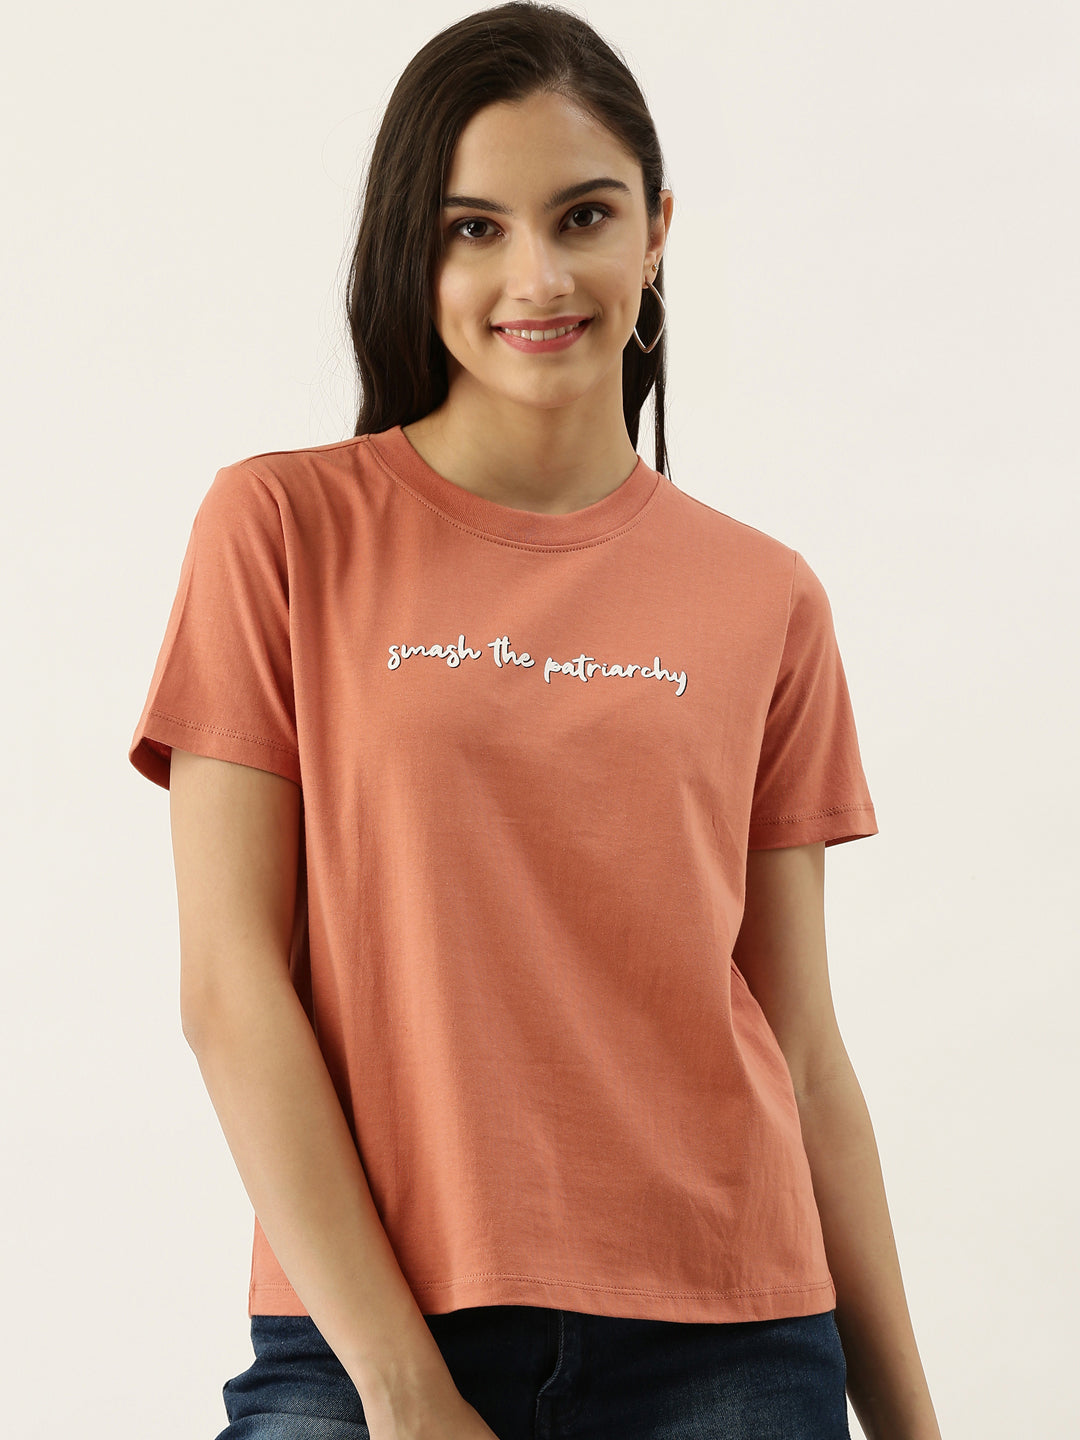 Brown Printed T-Shirt For Women